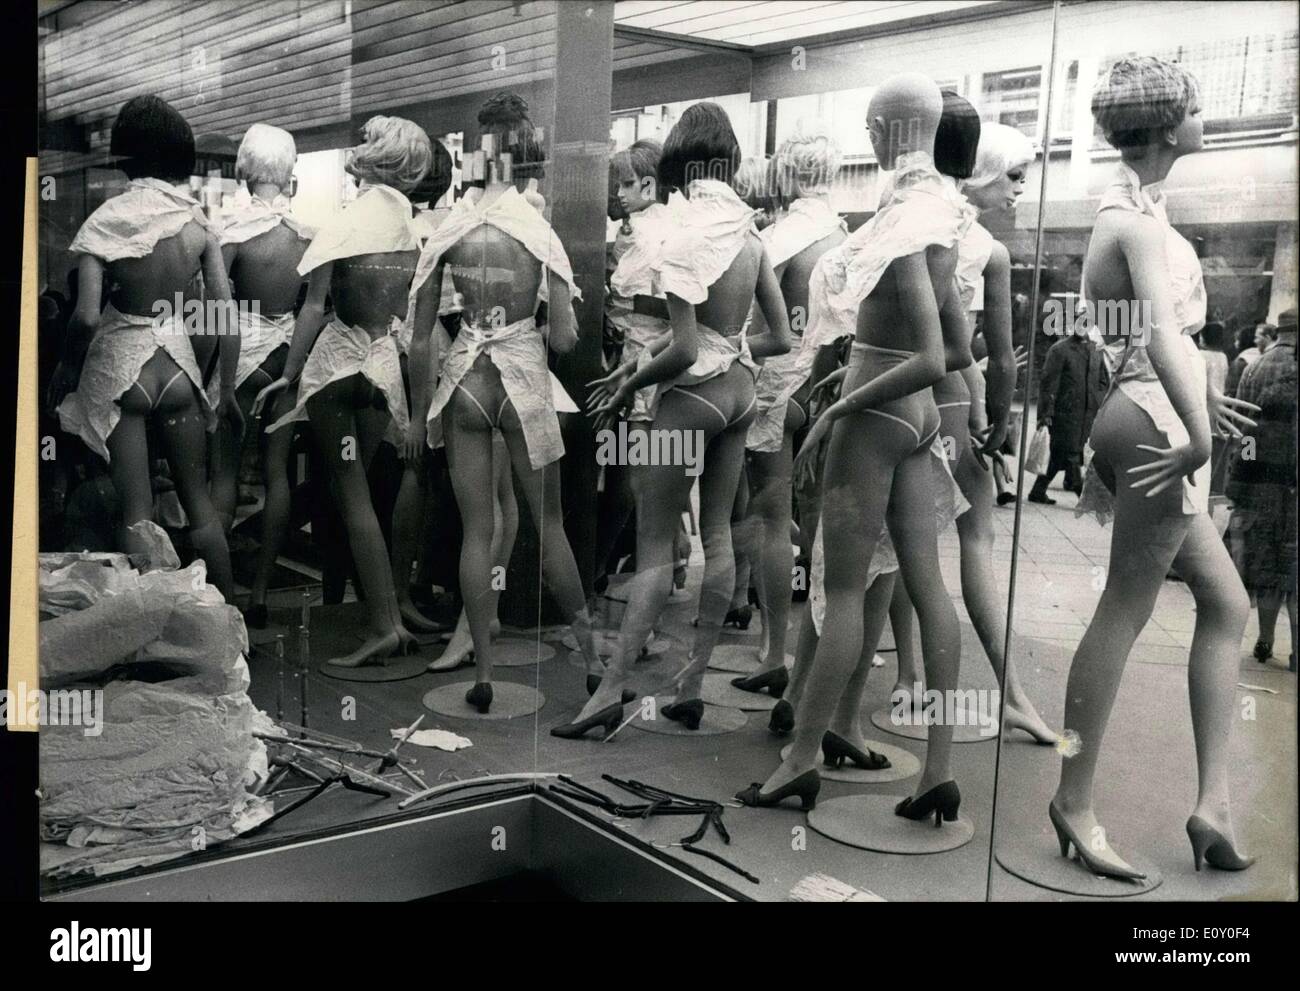 Feb. 06, 1968 - Our photographer discovered a ''scantily clad'' group of ''young woman'' on a well-known street in K?ln! They are shown there wide-open. Someone, or some people, had torn the clothes from their bodies. But these mannequins aren't victims of bad blokes, but rather women in a buying frenzy. The shoppers were after the cheap clothes on the mannequins, which were on sale. Sales are serious business! Stock Photo